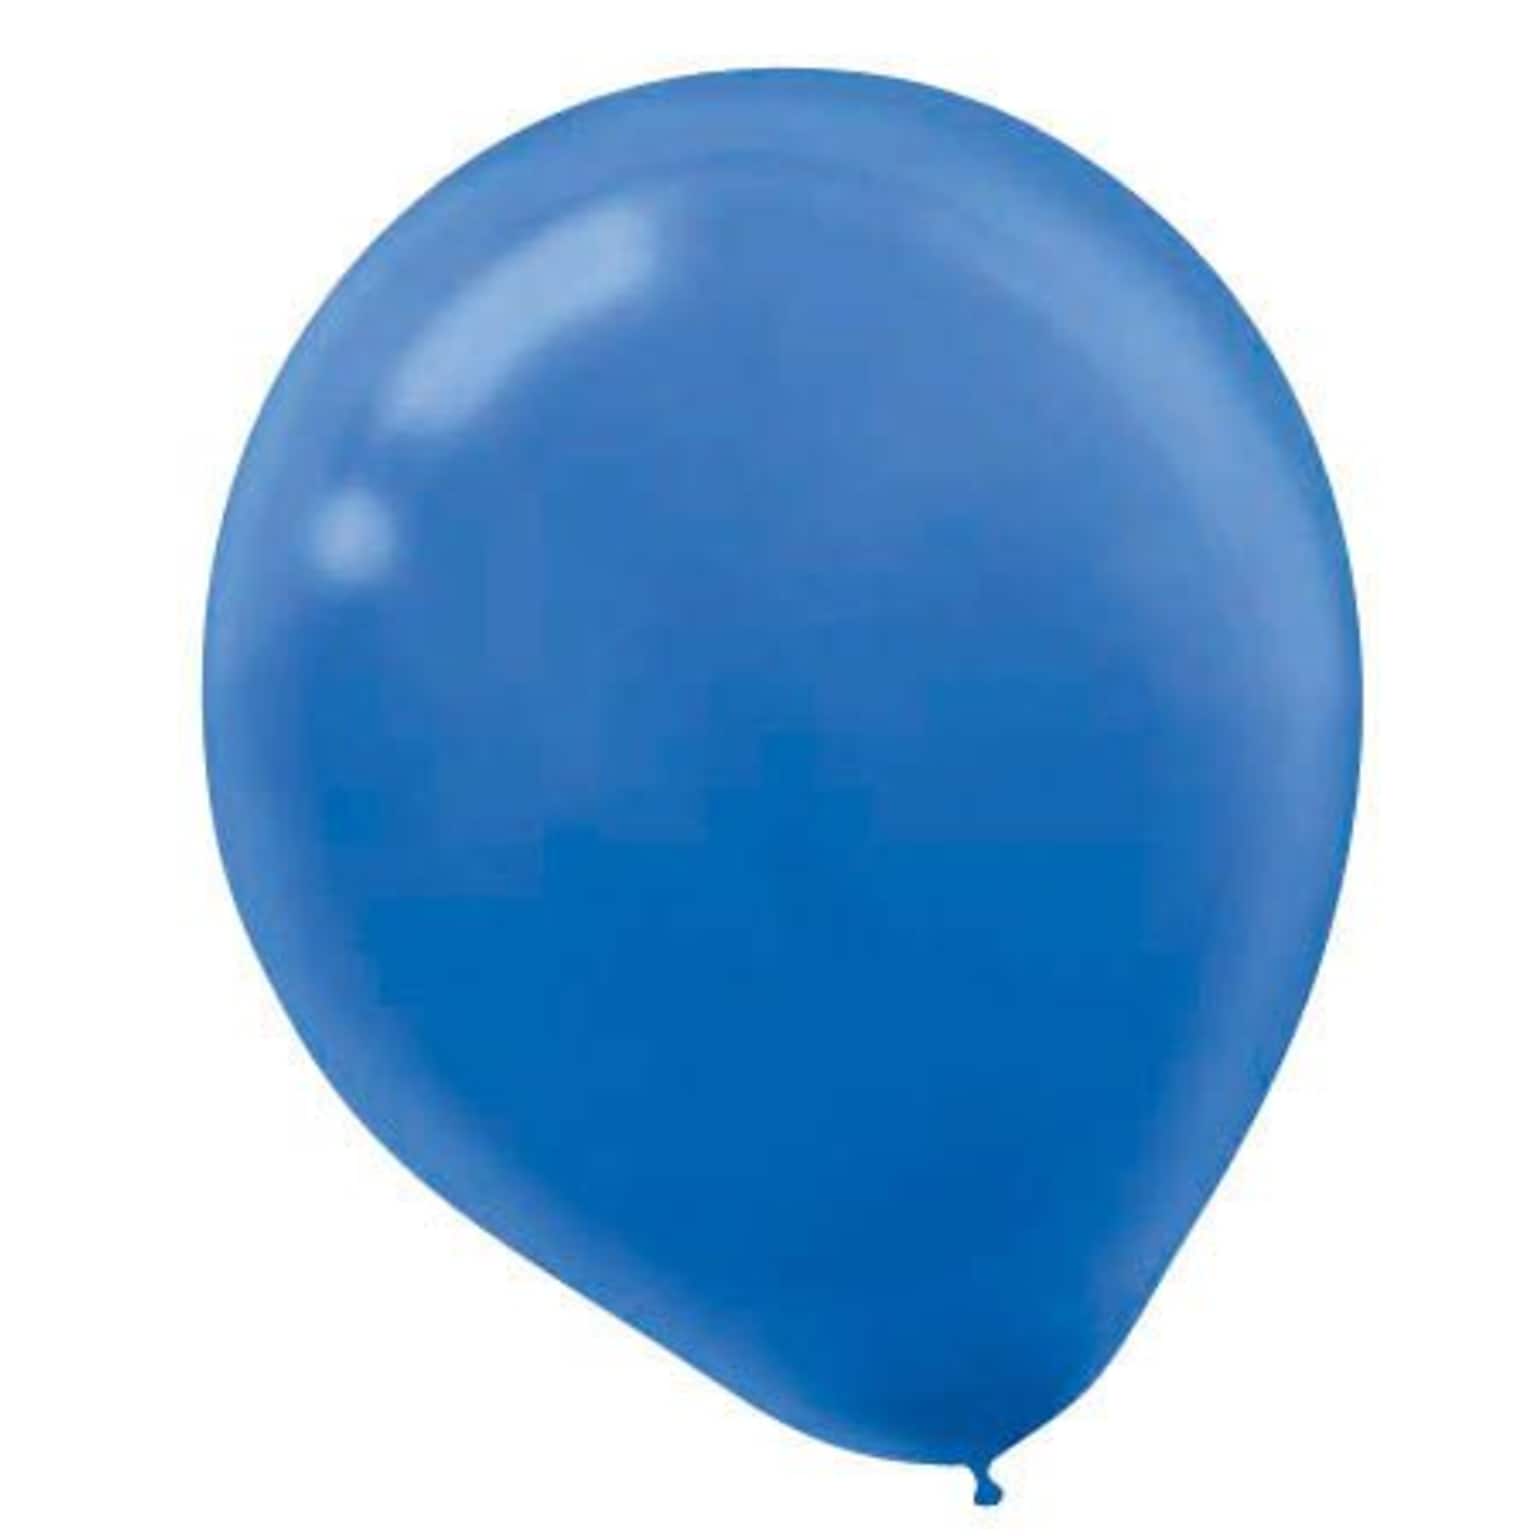 Amscan Solid Color Latex Balloons Packaged, 9, 18/Pack, Bright Royal Blue, 20 Per Pack (113255.105)